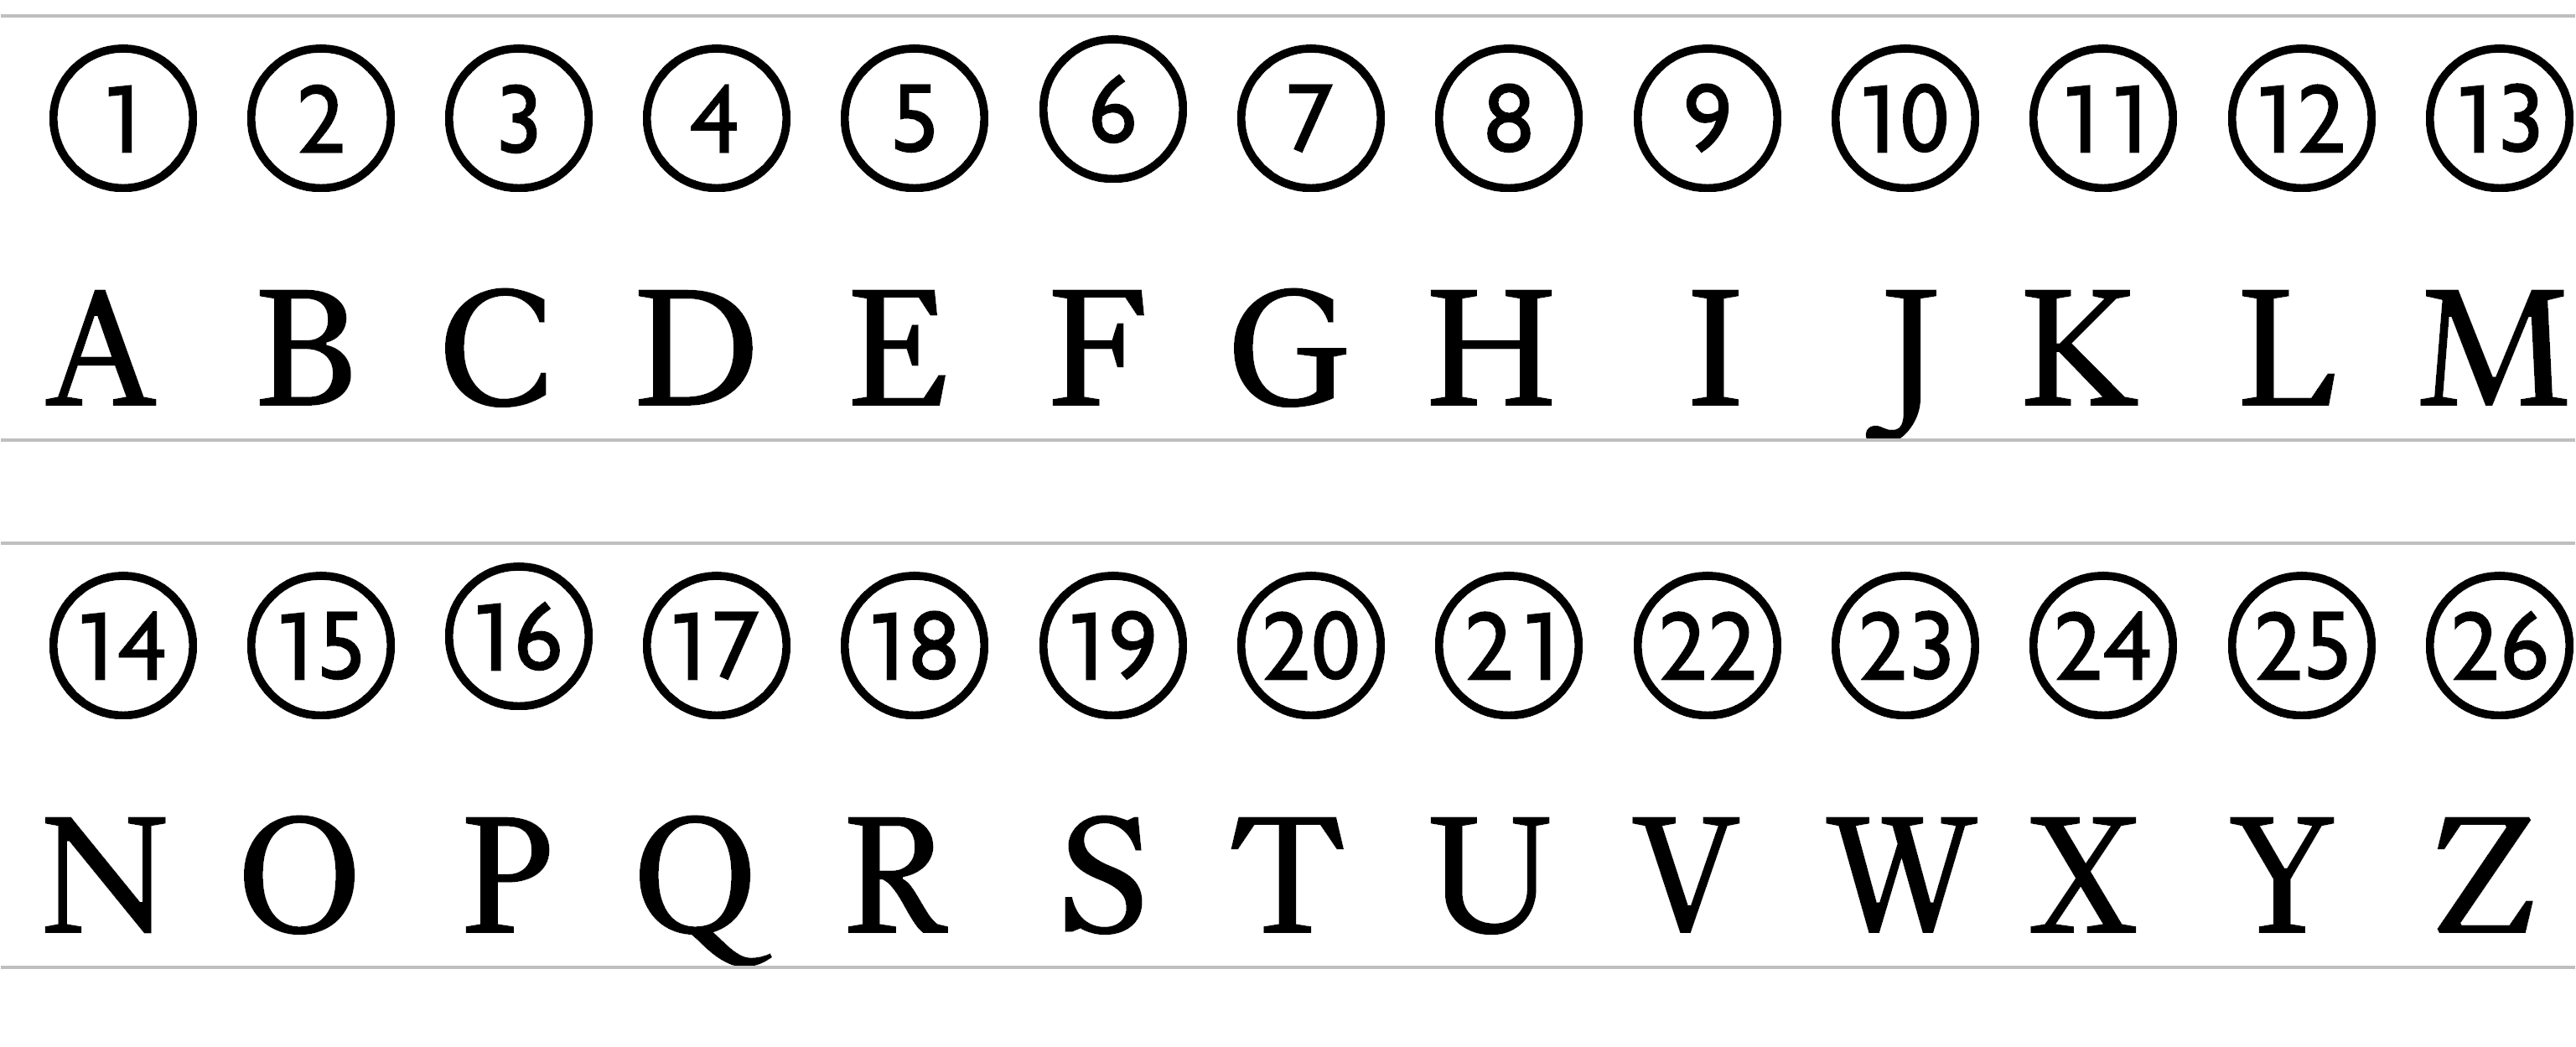 Table 9.12 - PS Icons, font characters